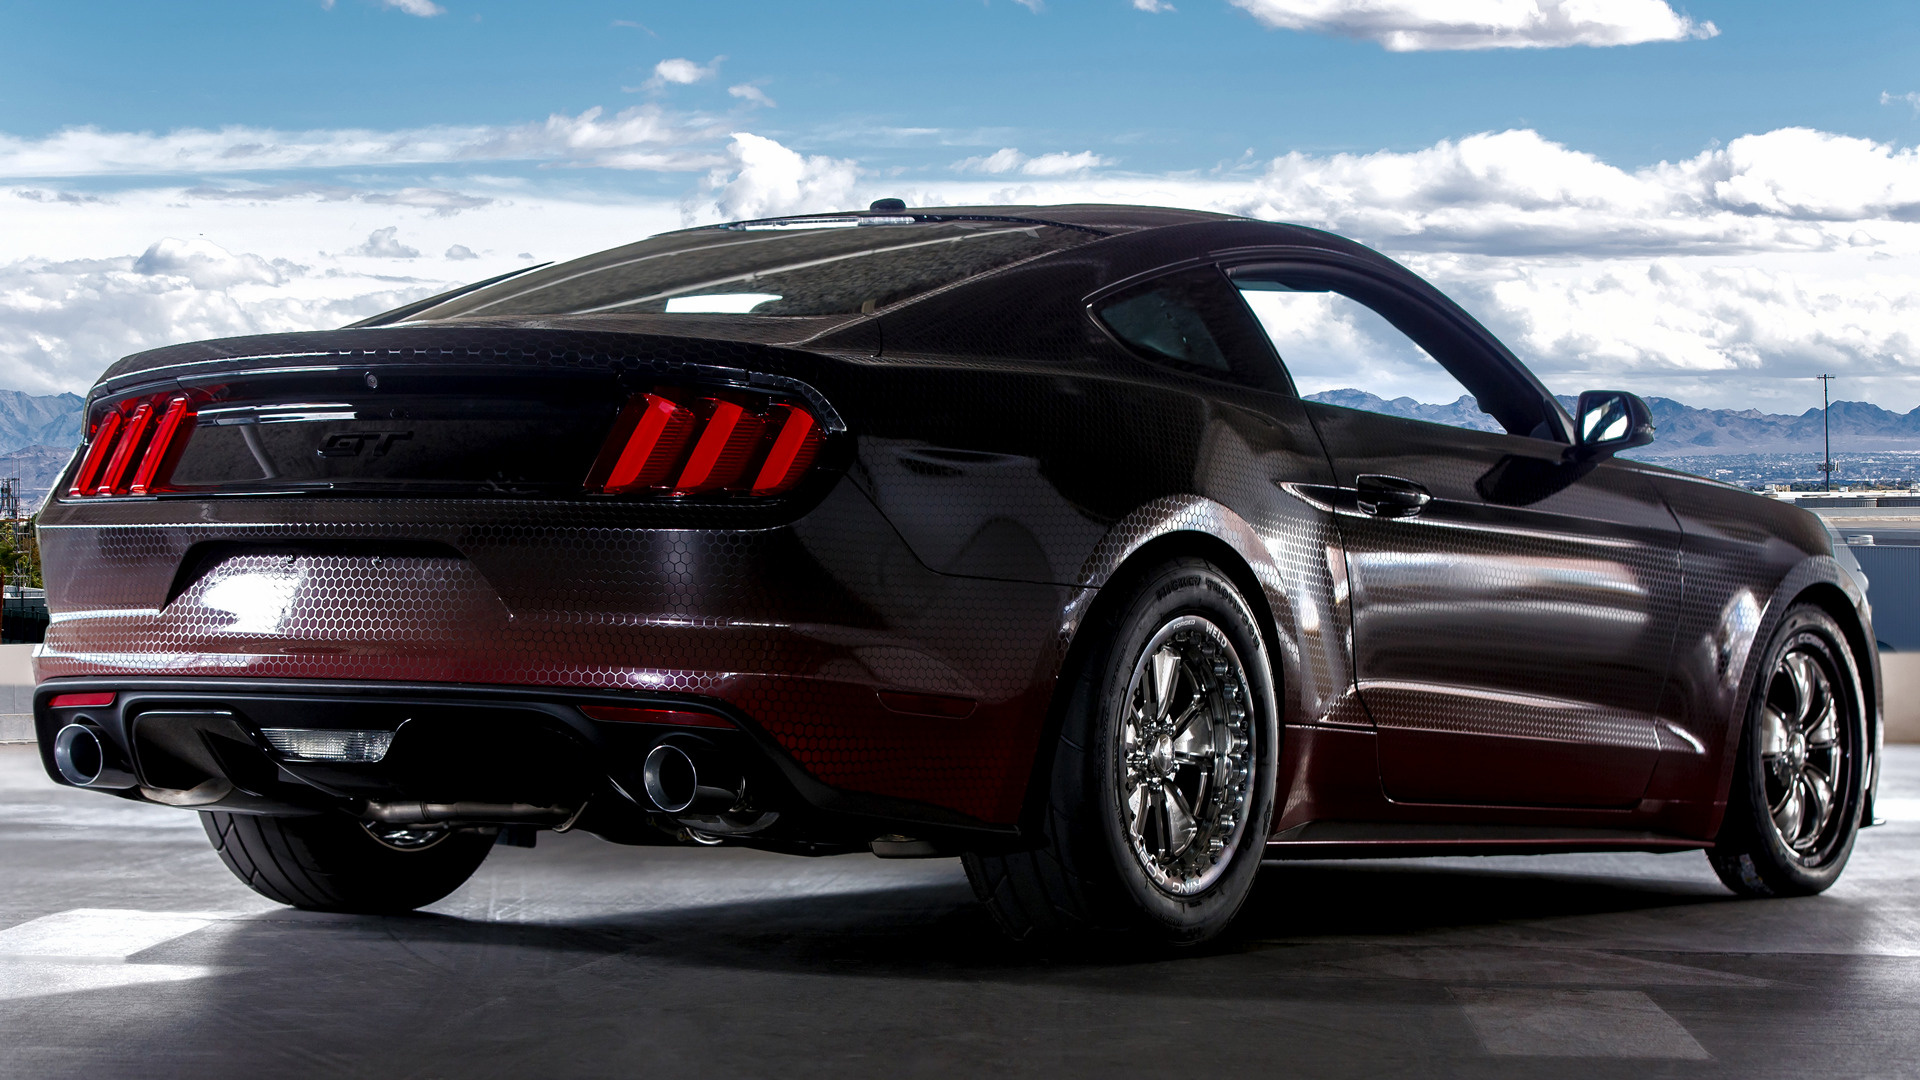 Car Concept Car Coupe Ford Mustang Gt King Cobra Muscle Car 1920x1080